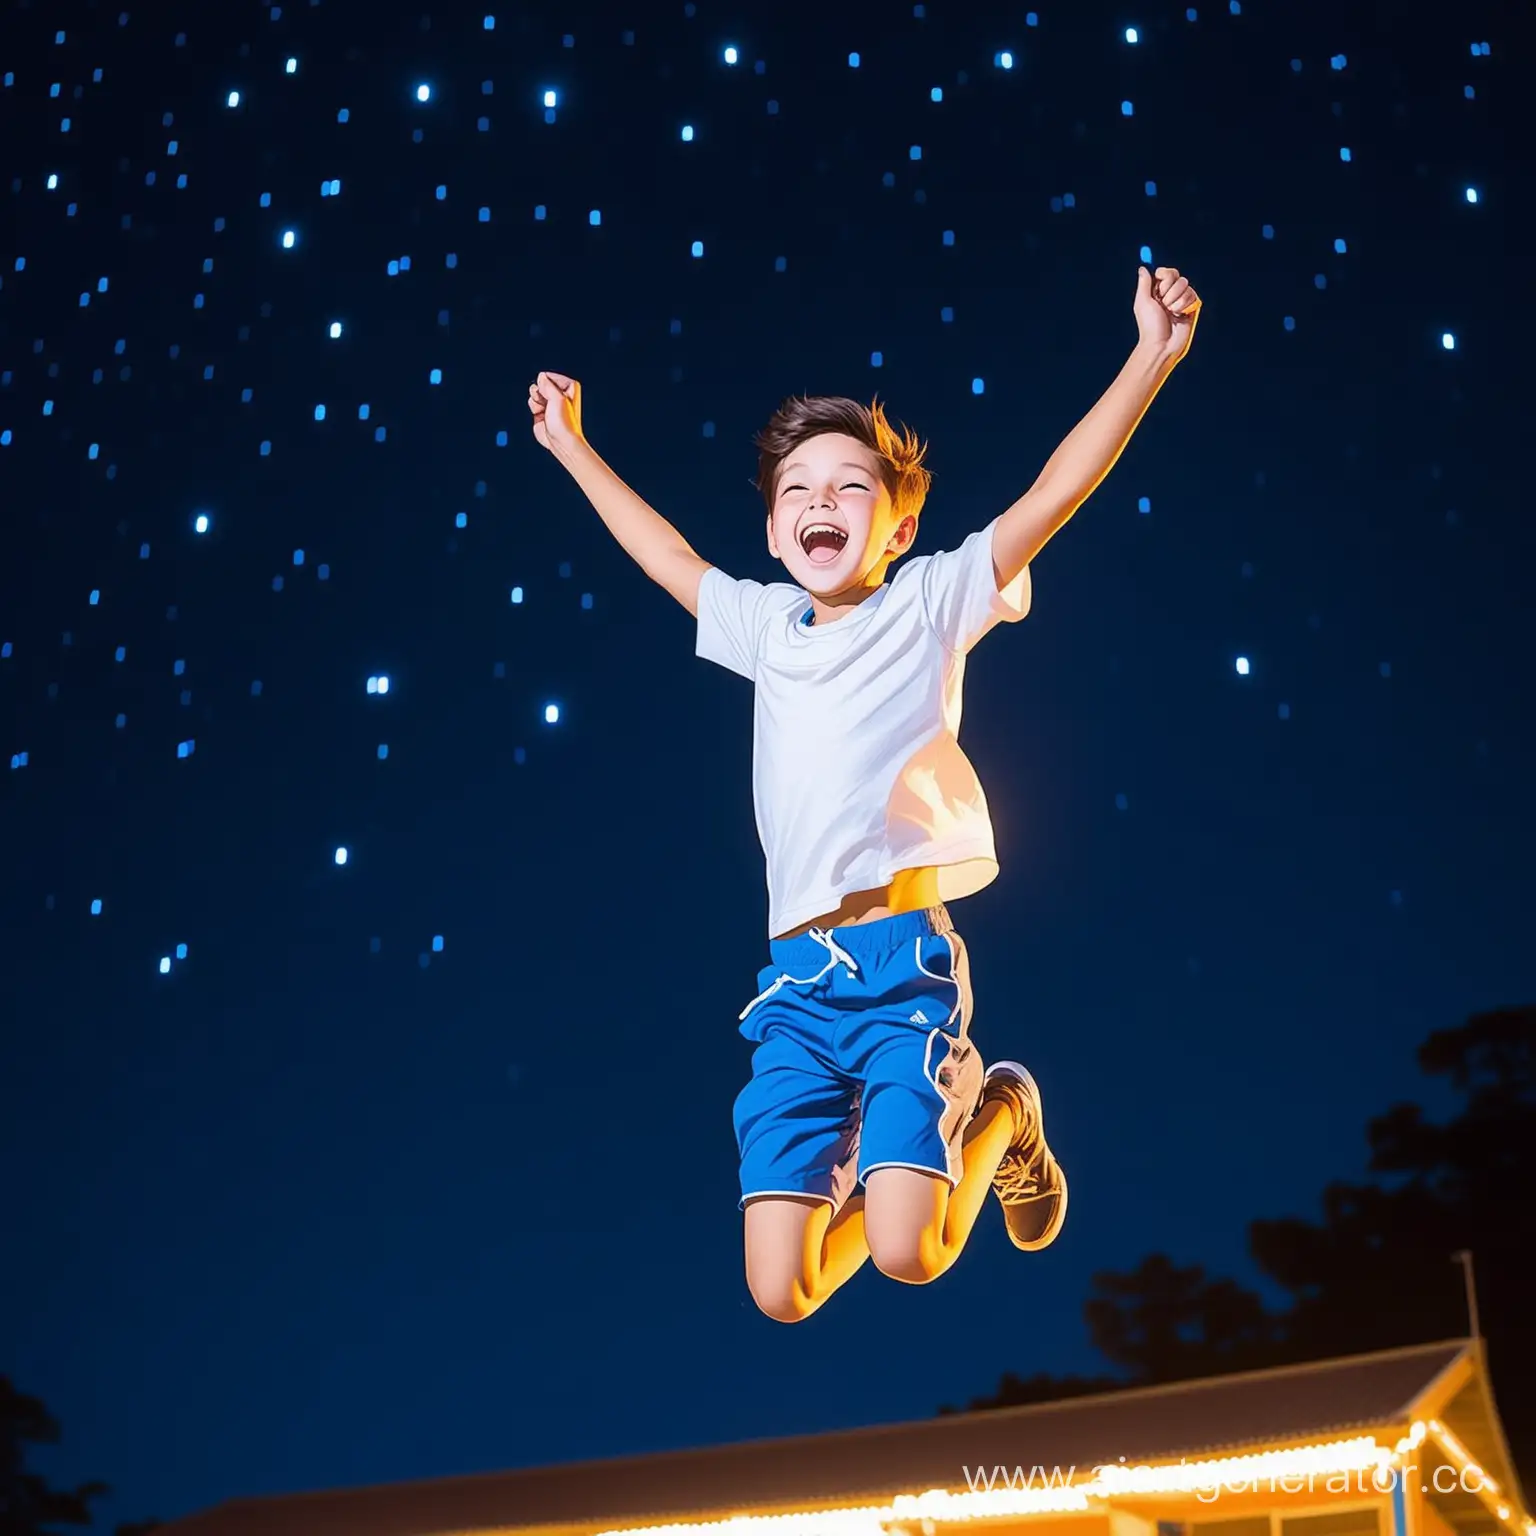 Youthful-Exuberance-12YearOld-Boy-Leaping-in-Moonlit-Night